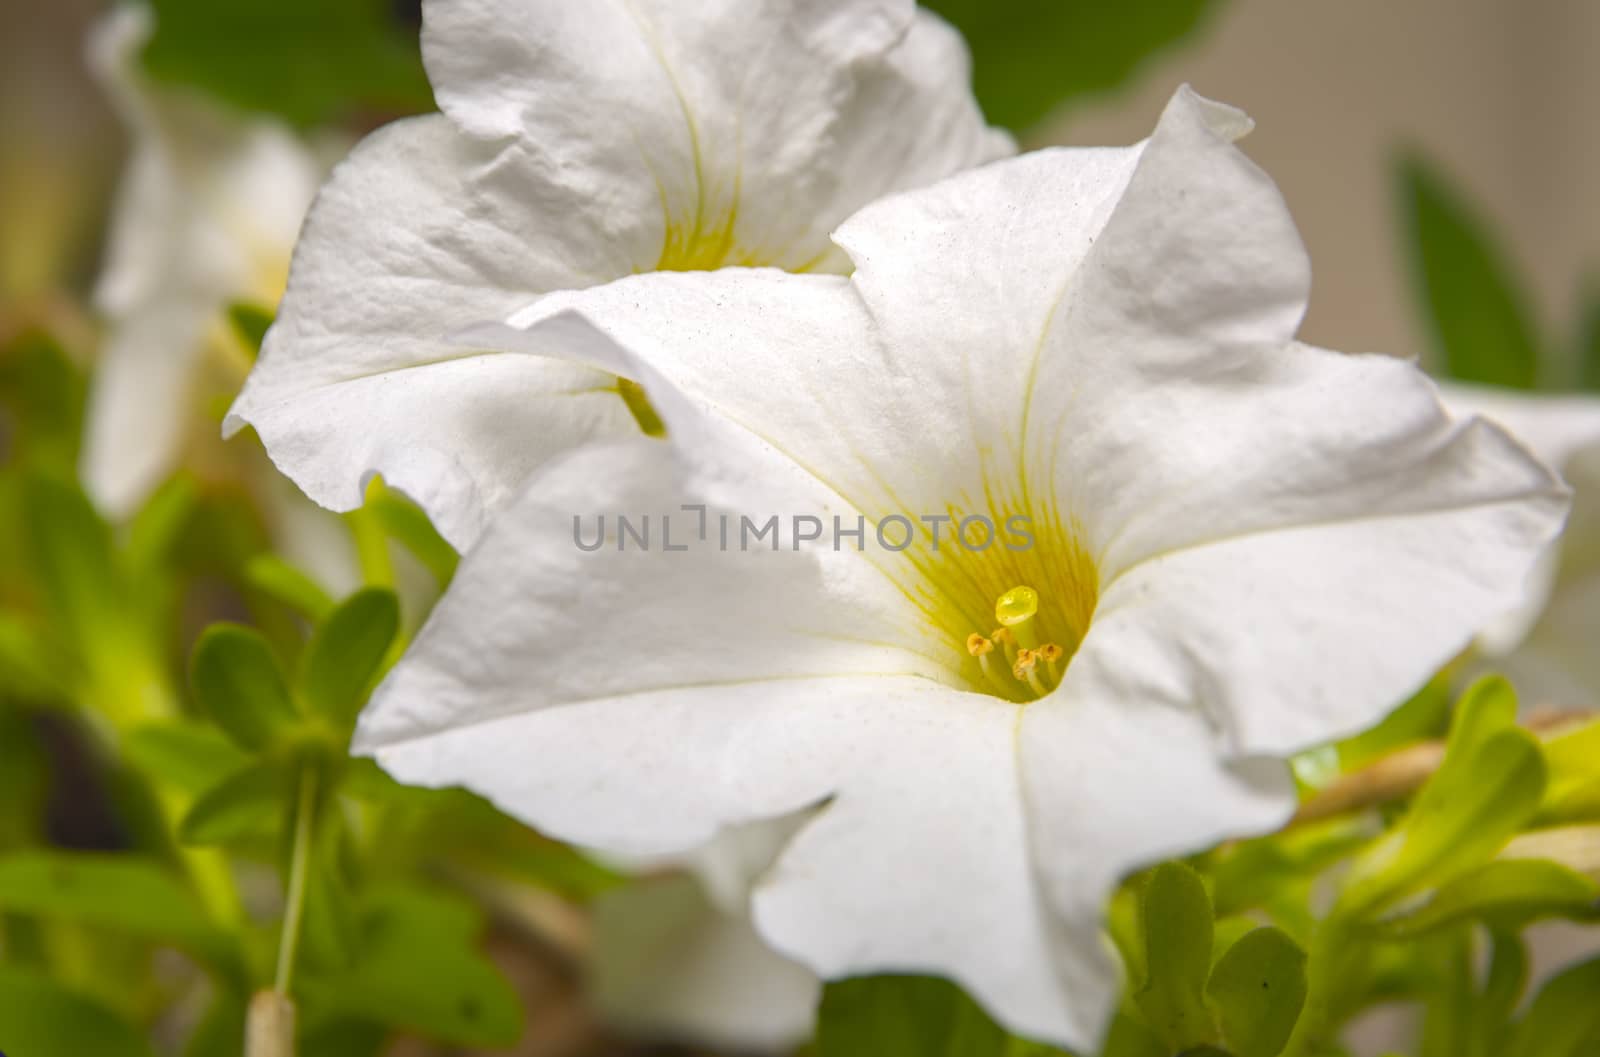 Closeup of white Petunia flower with Stigma pistillum and Anther androecium. Flower in nature.